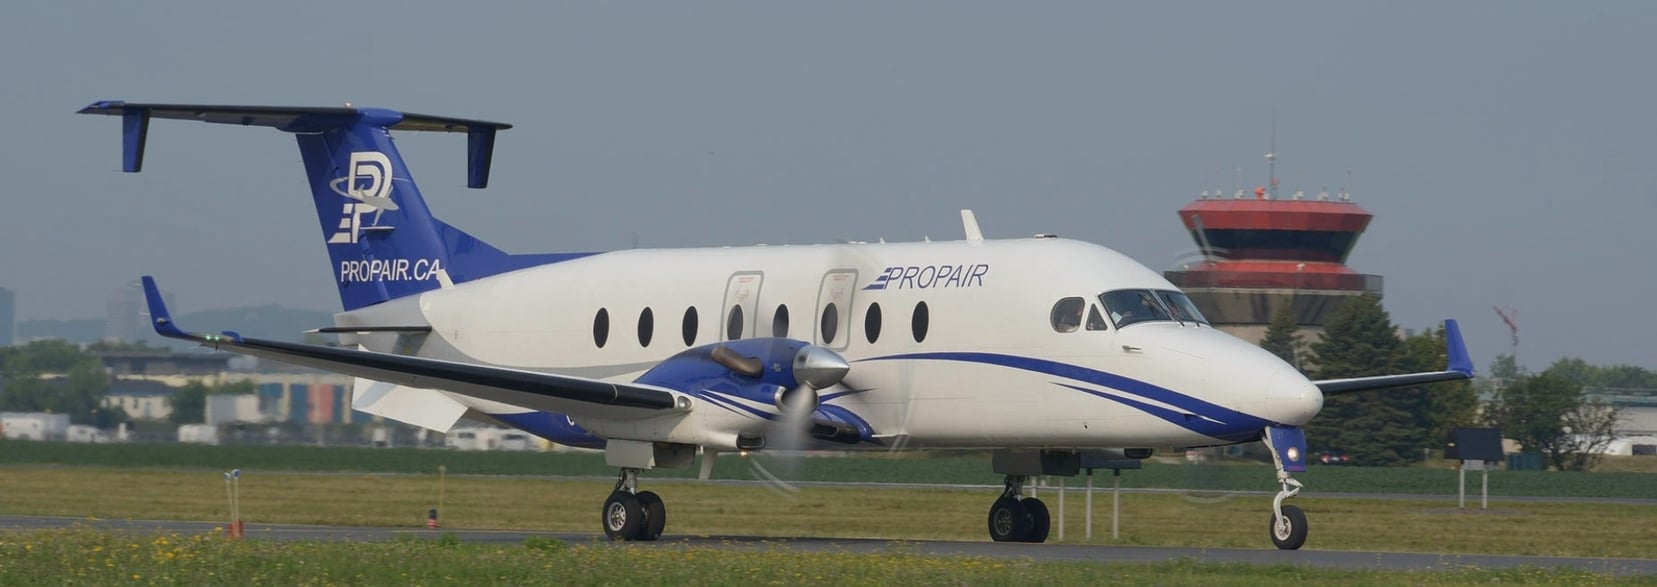 Photo of Propair's B1900D aircraft on a runway during the summer